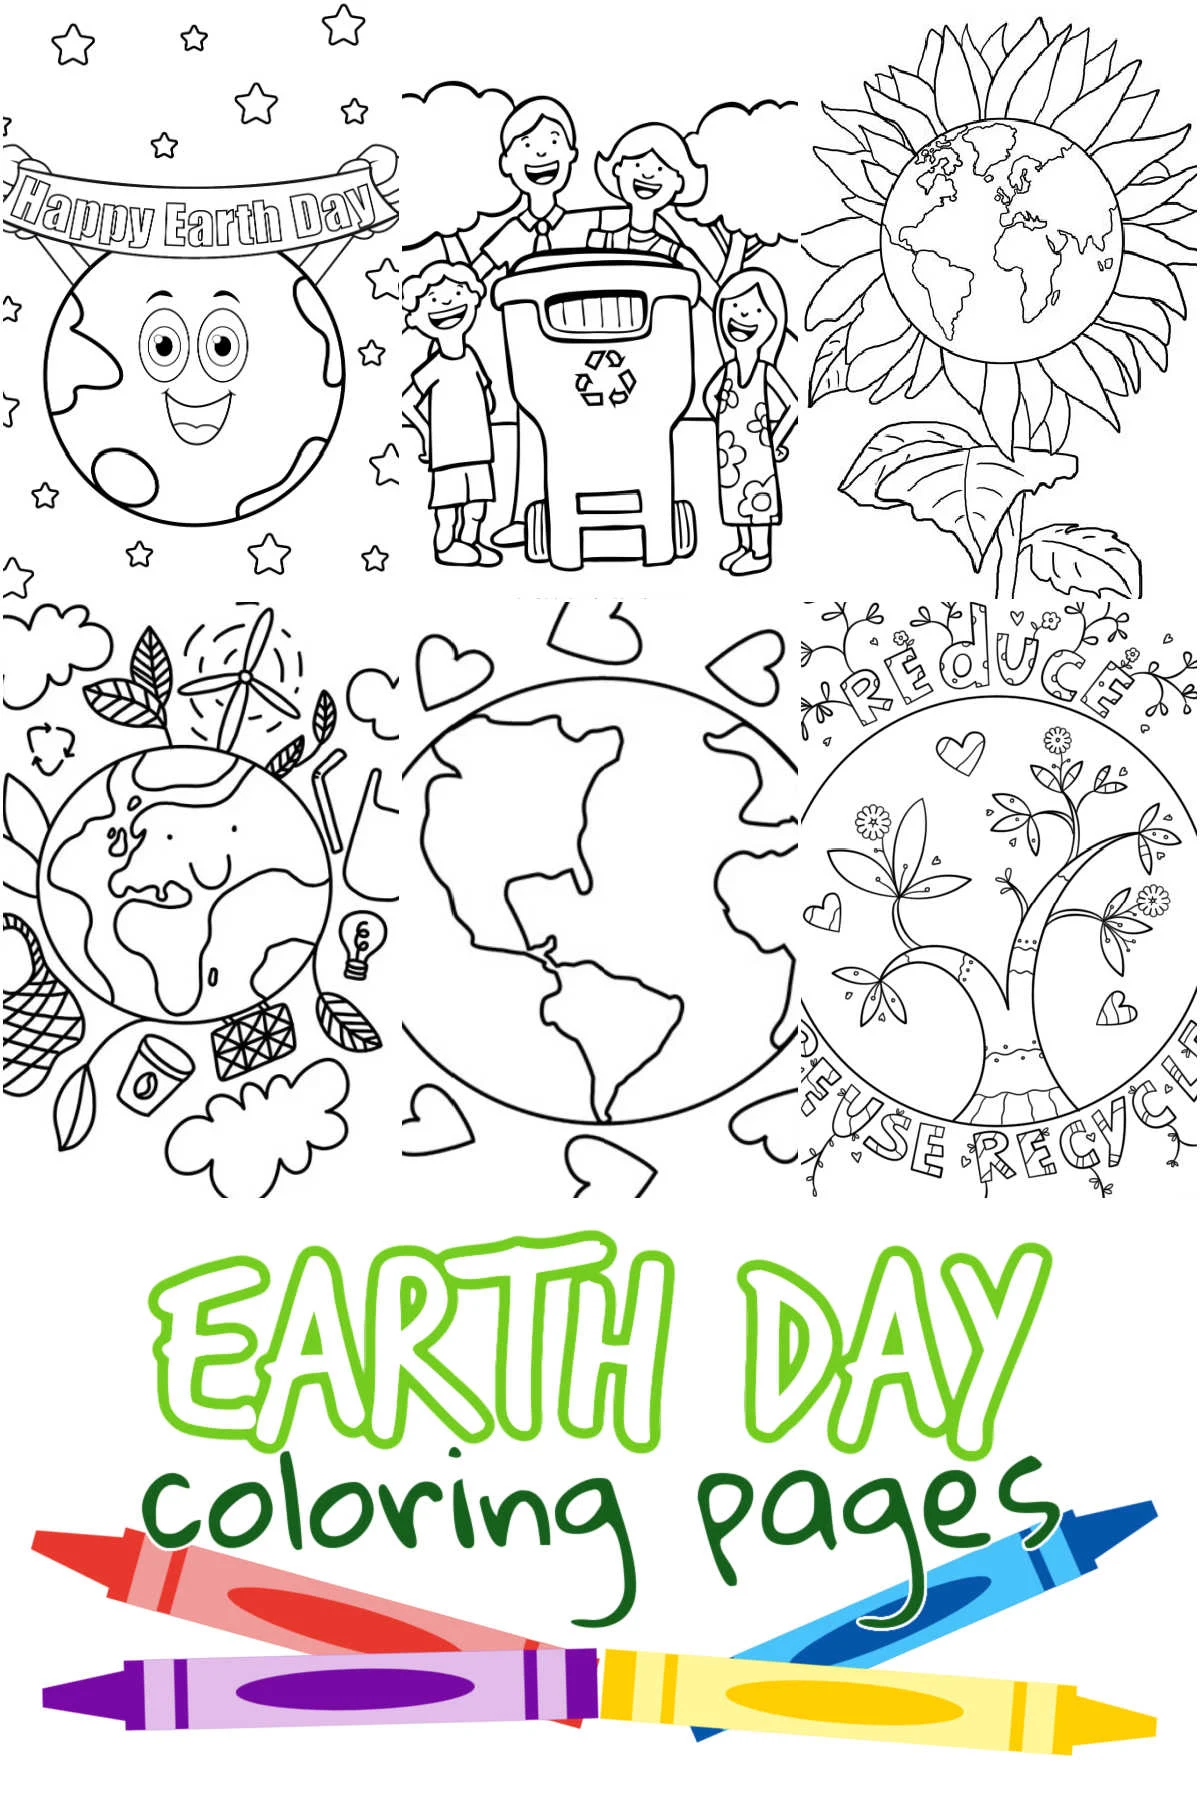 Collage of Earth Day Coloring Pages